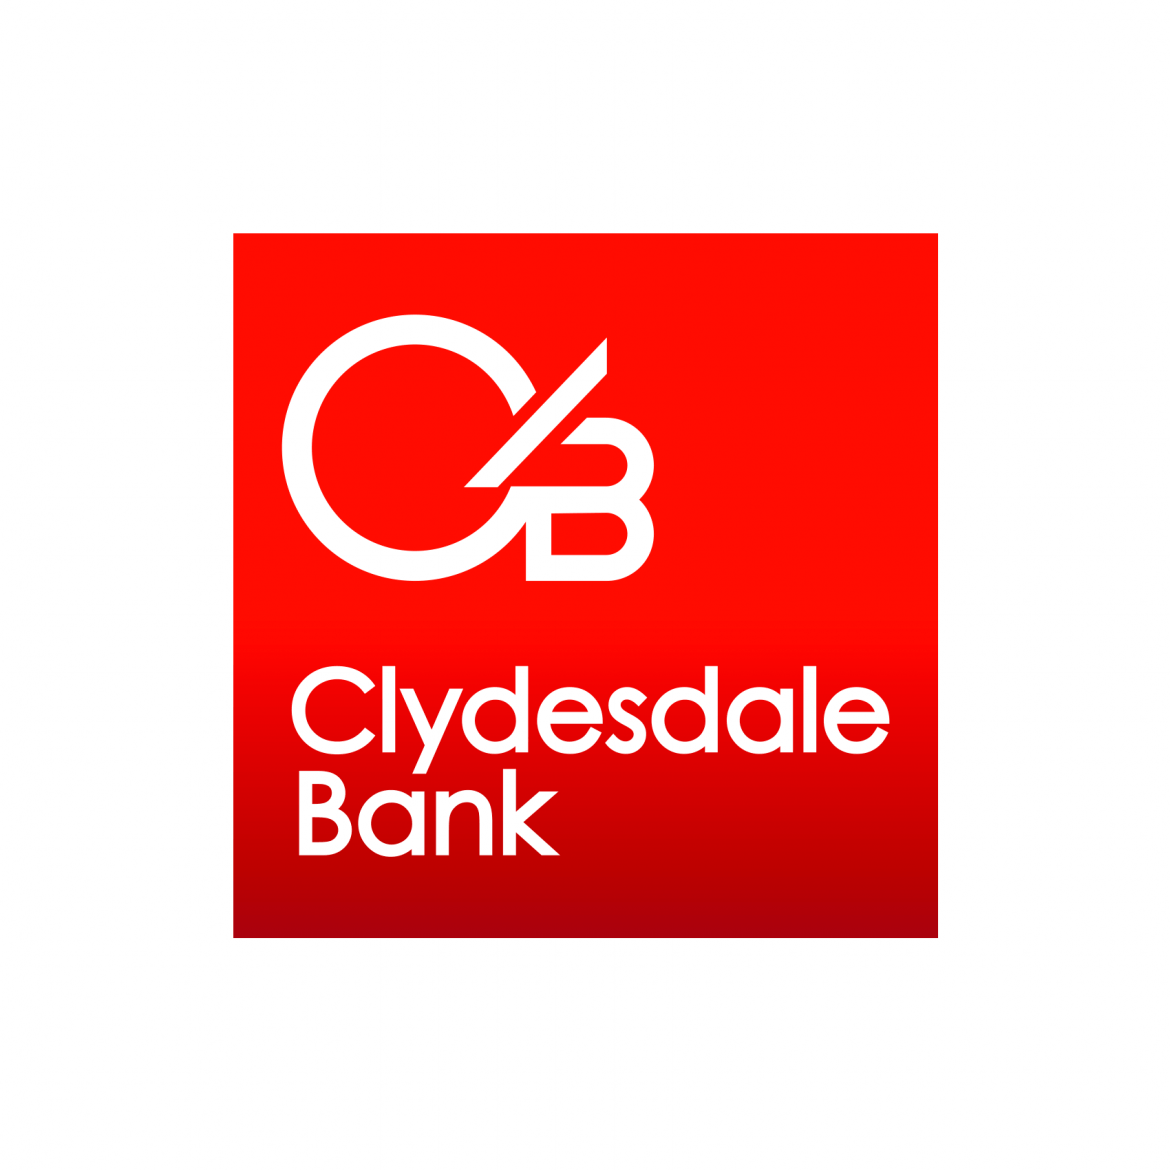 Clydesdale Logo - Clydesdale Bank Uniform Printed Textile Commission